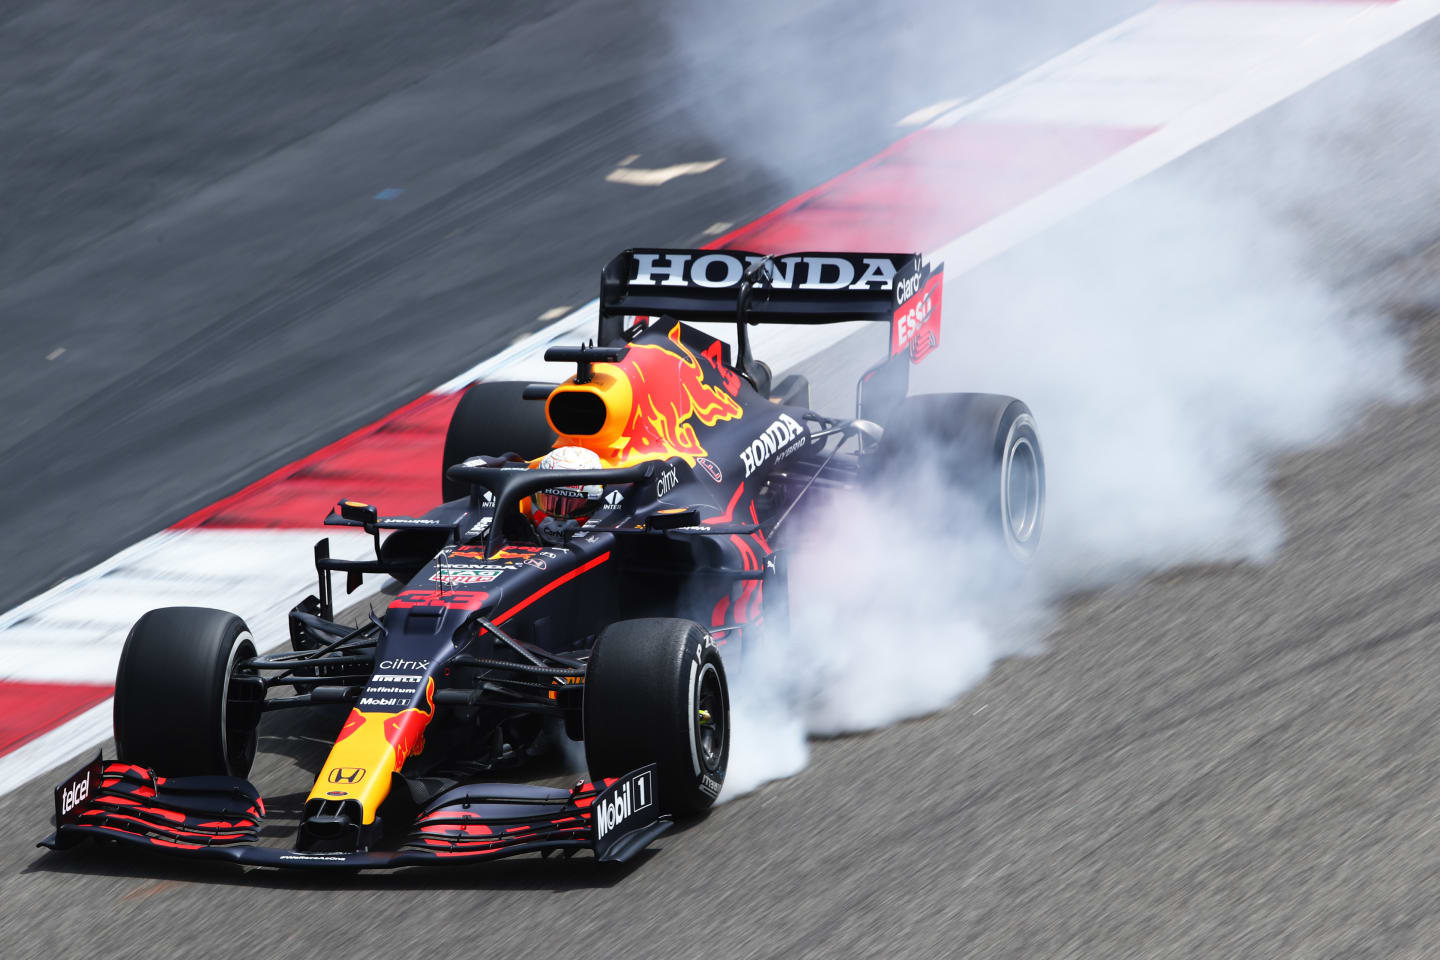 A spectacular puff of smoke emitted by Verstappen's RB16B as he locks up